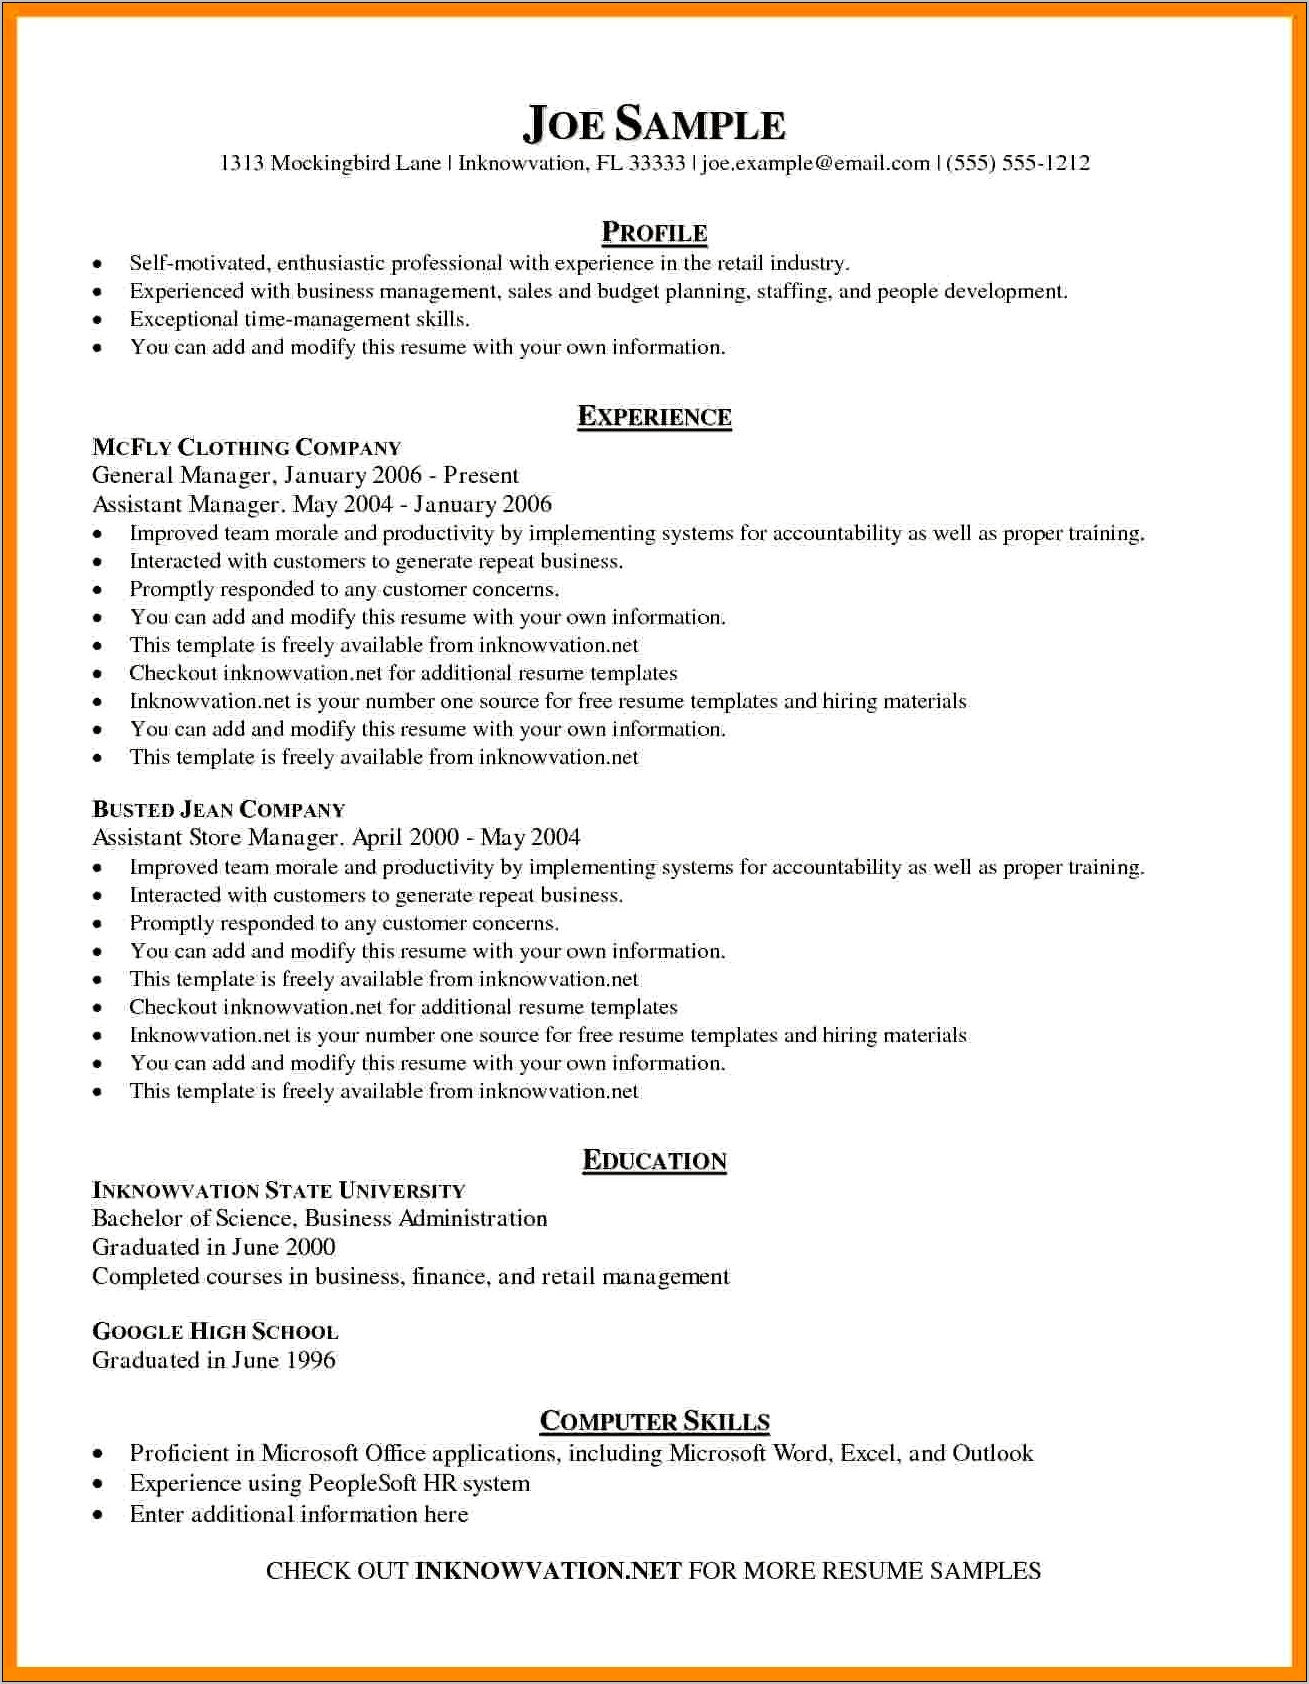 Resume Proficient In Word Or Skilled In Word